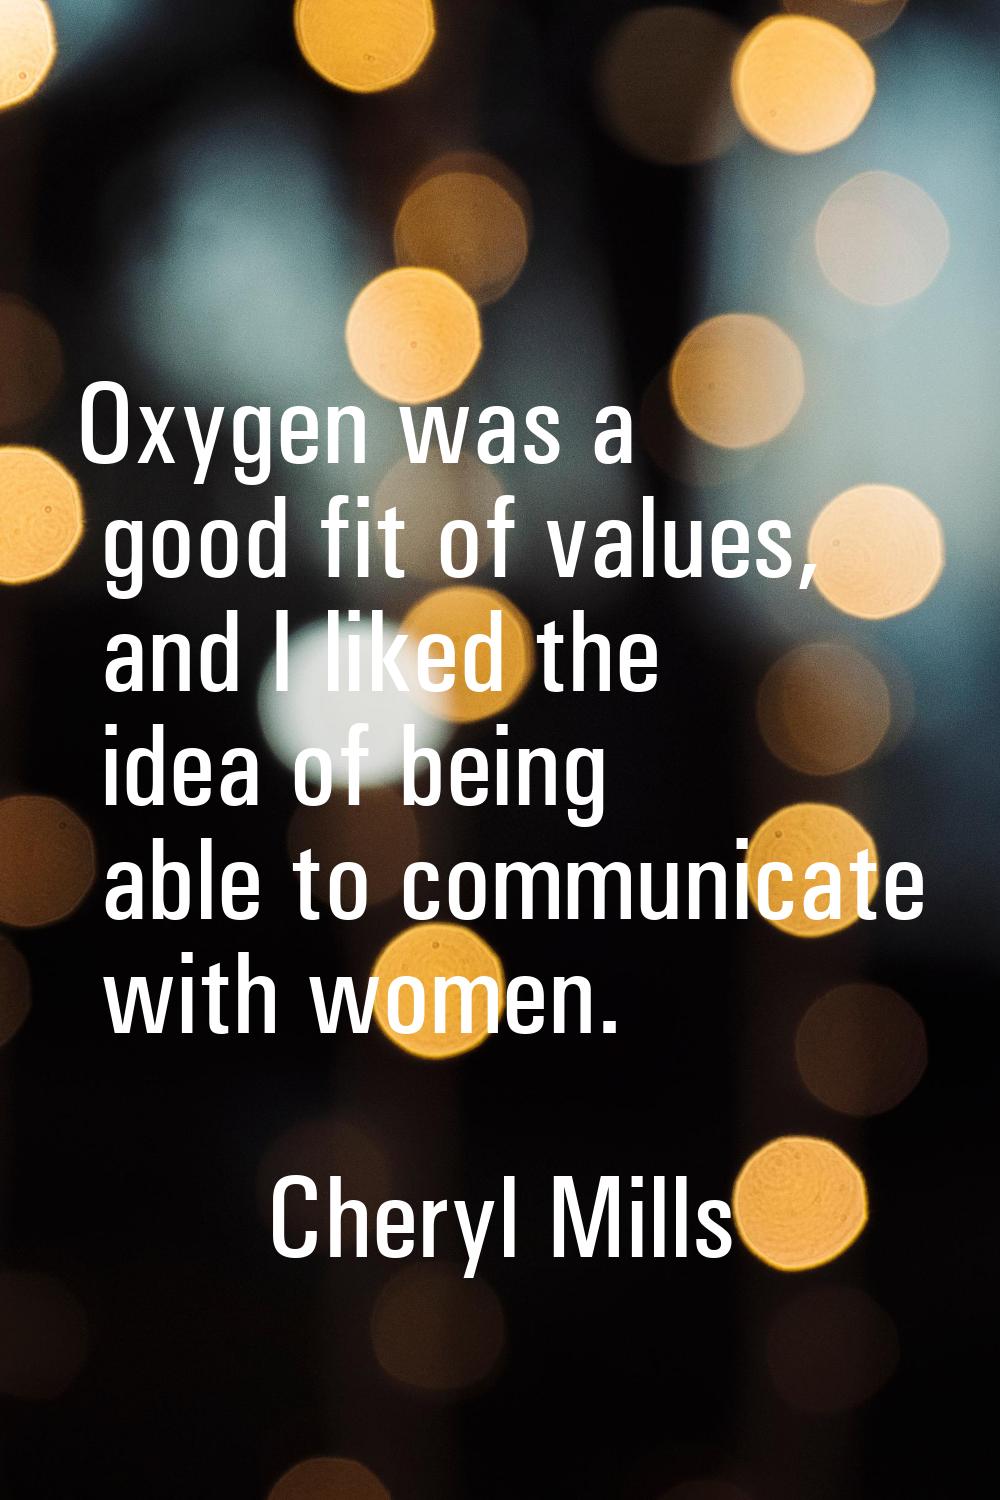 Oxygen was a good fit of values, and I liked the idea of being able to communicate with women.